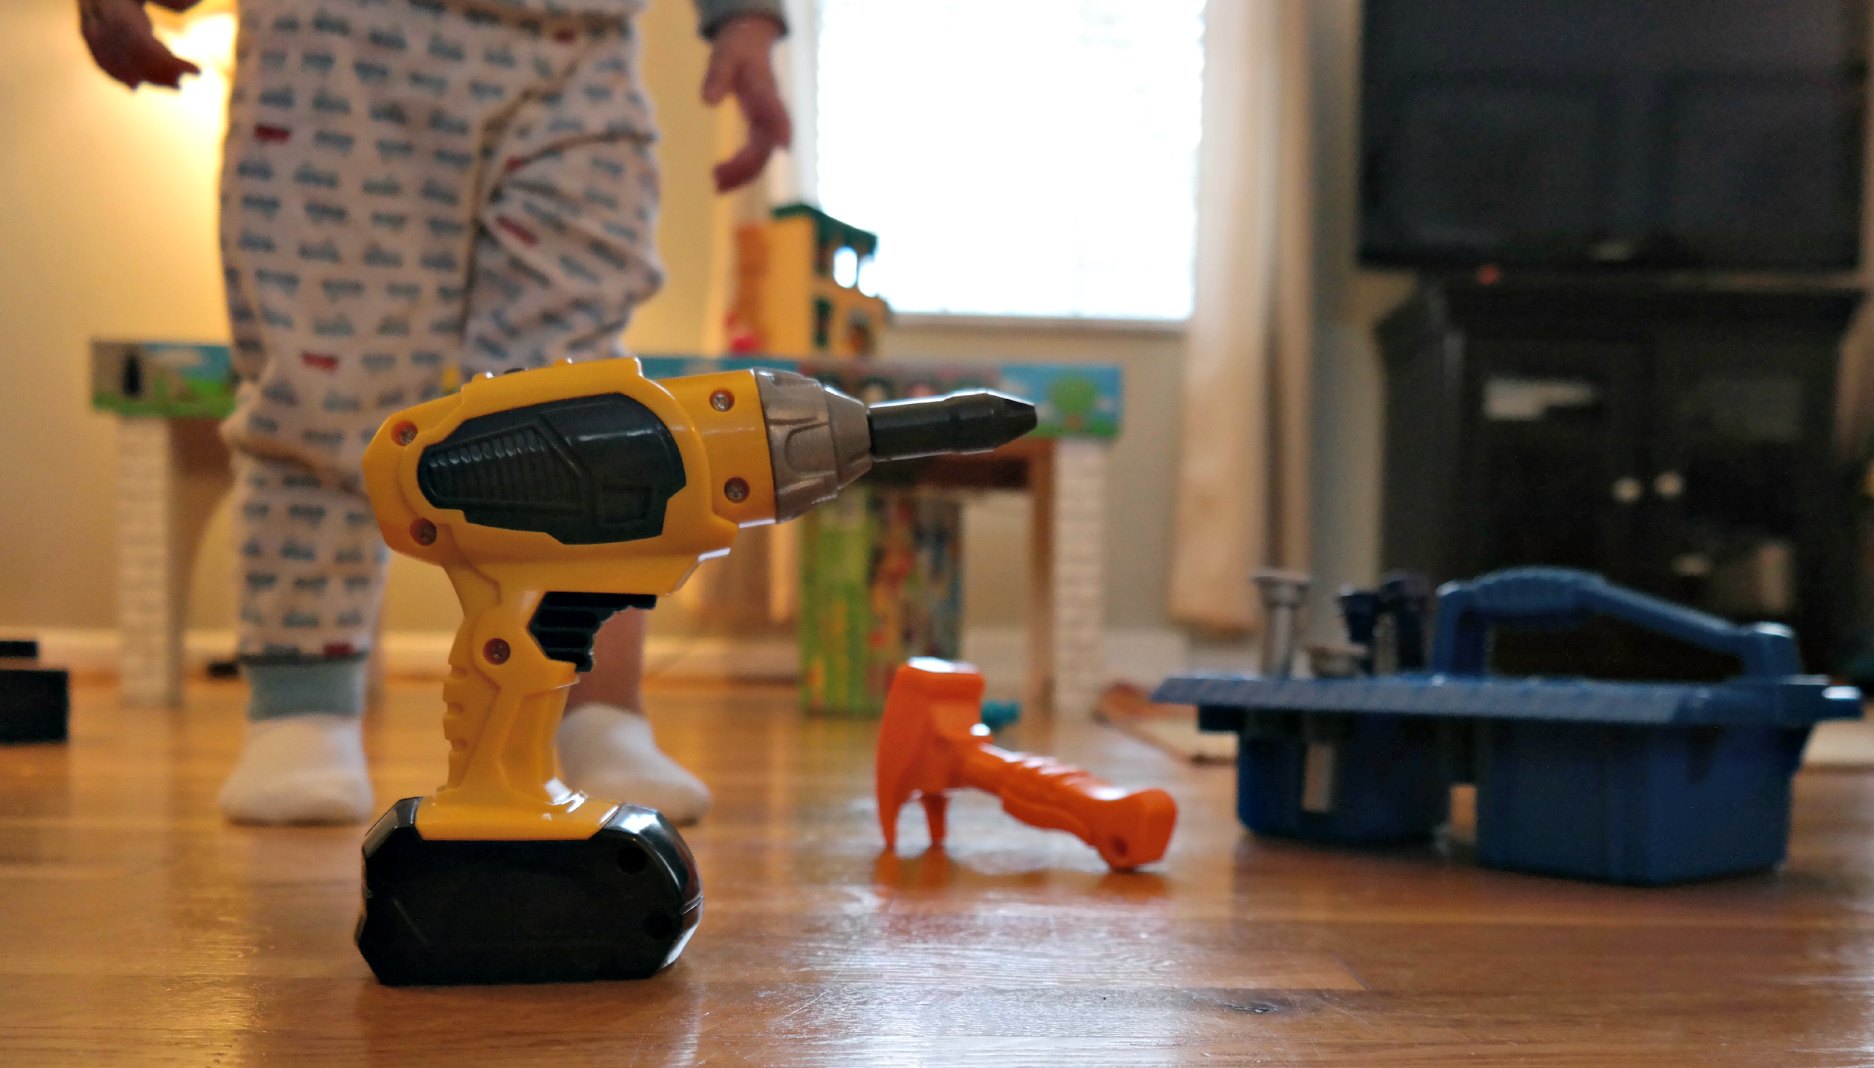 Pretend toys for 2-year-olds: Tools